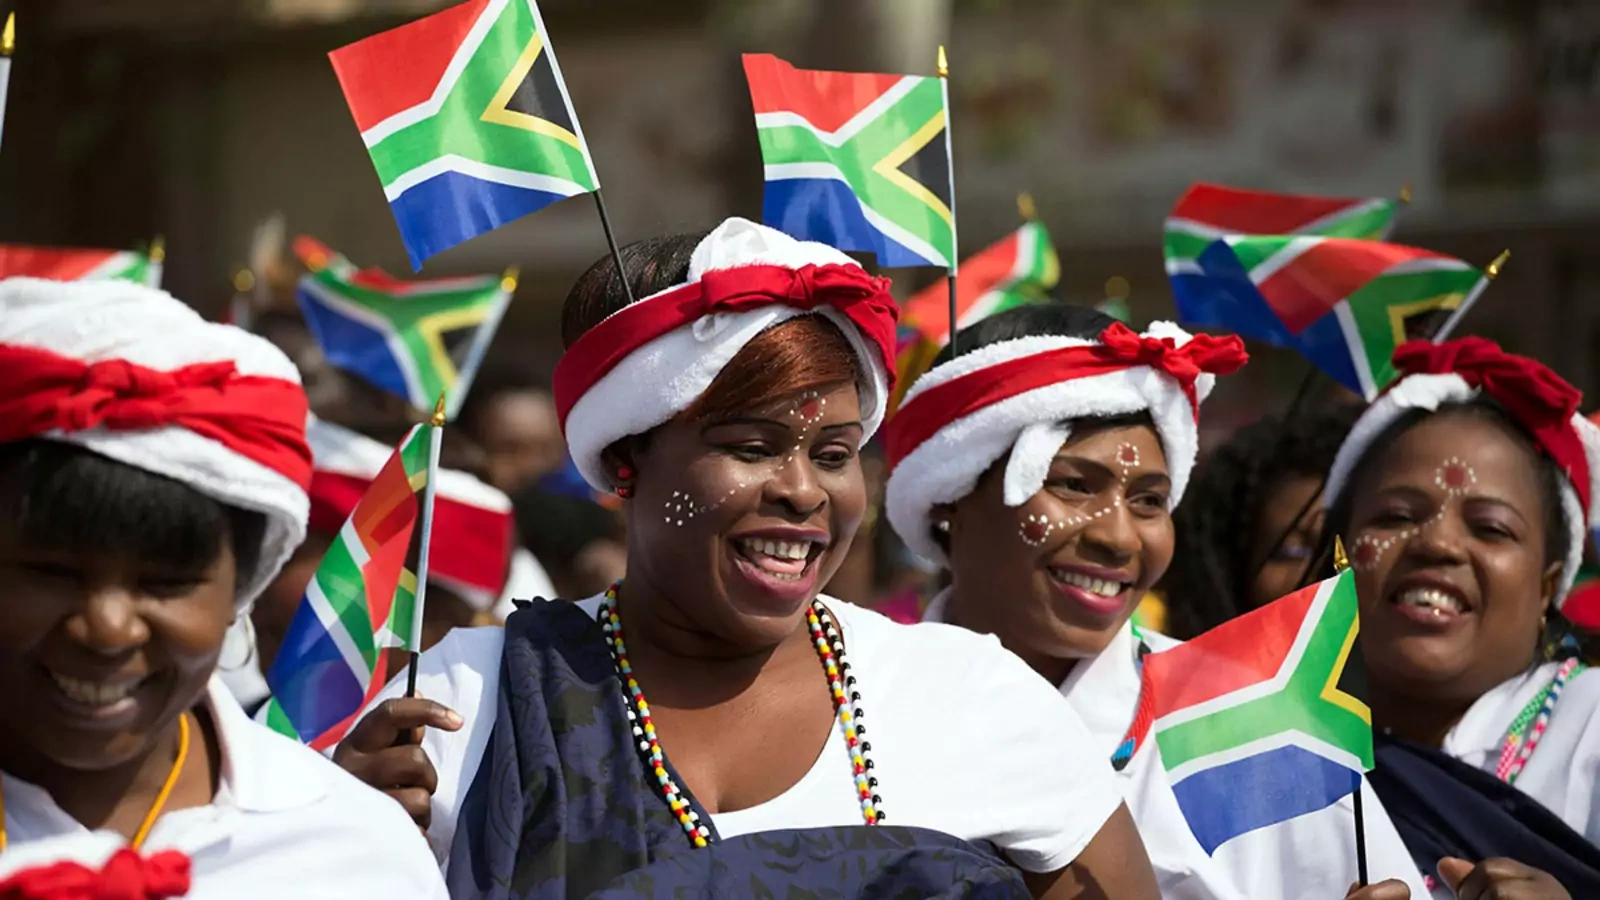 South Africans participate in a Heritage Day carnival in the city of Pretoria.